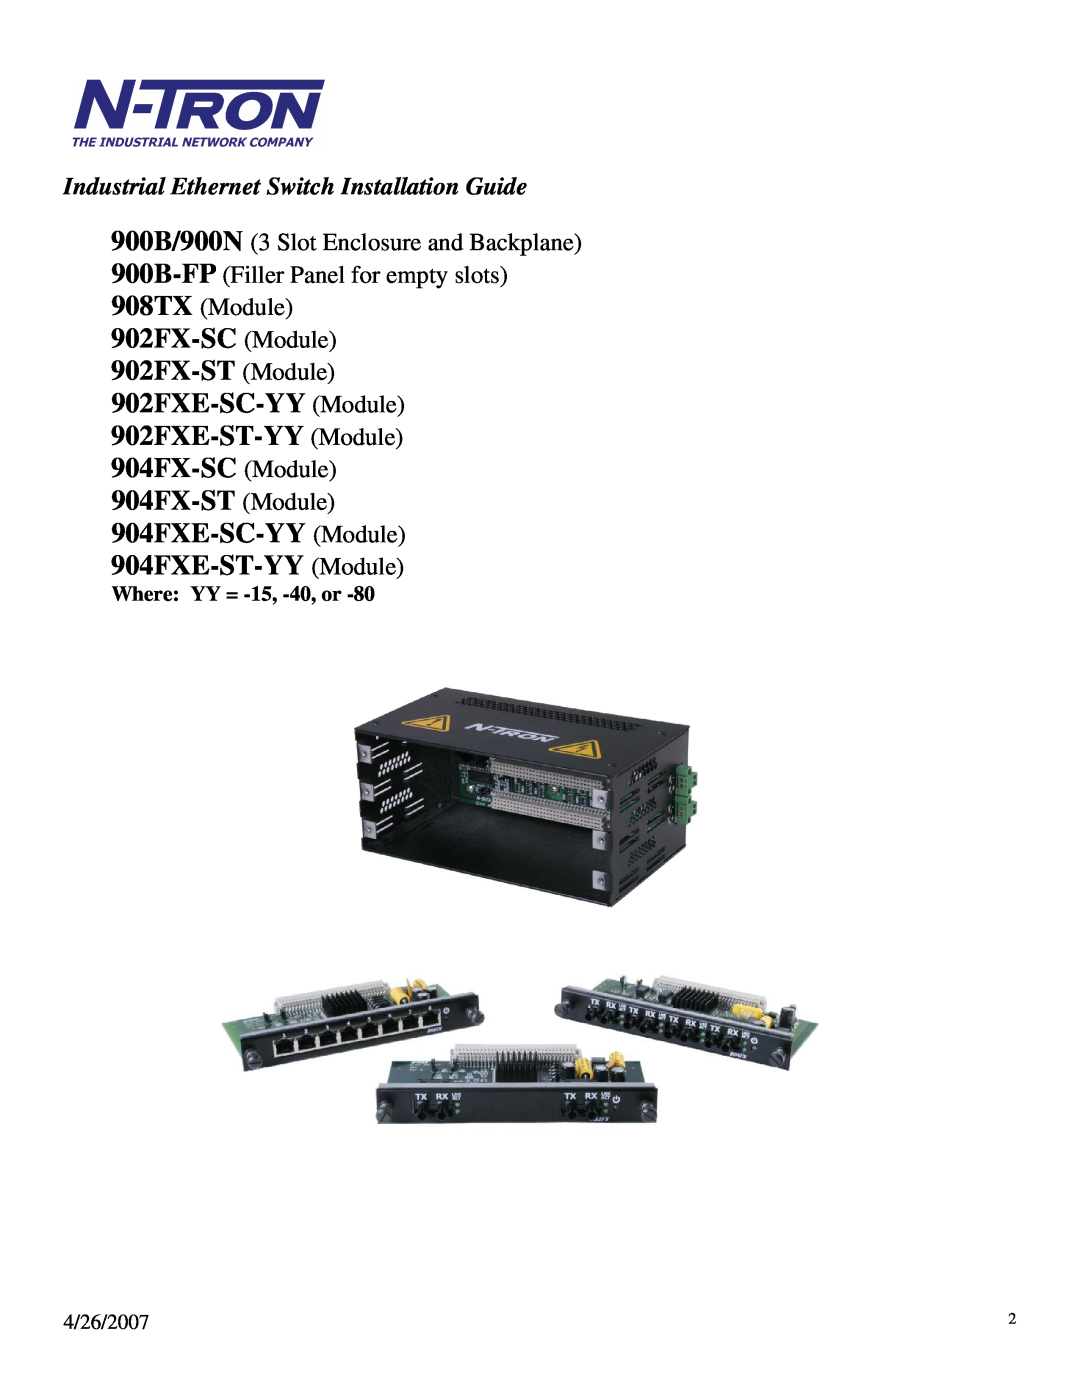 N-Tron 900 manual Industrial Ethernet Switch Installation Guide, Where YY = -15, -40, or 